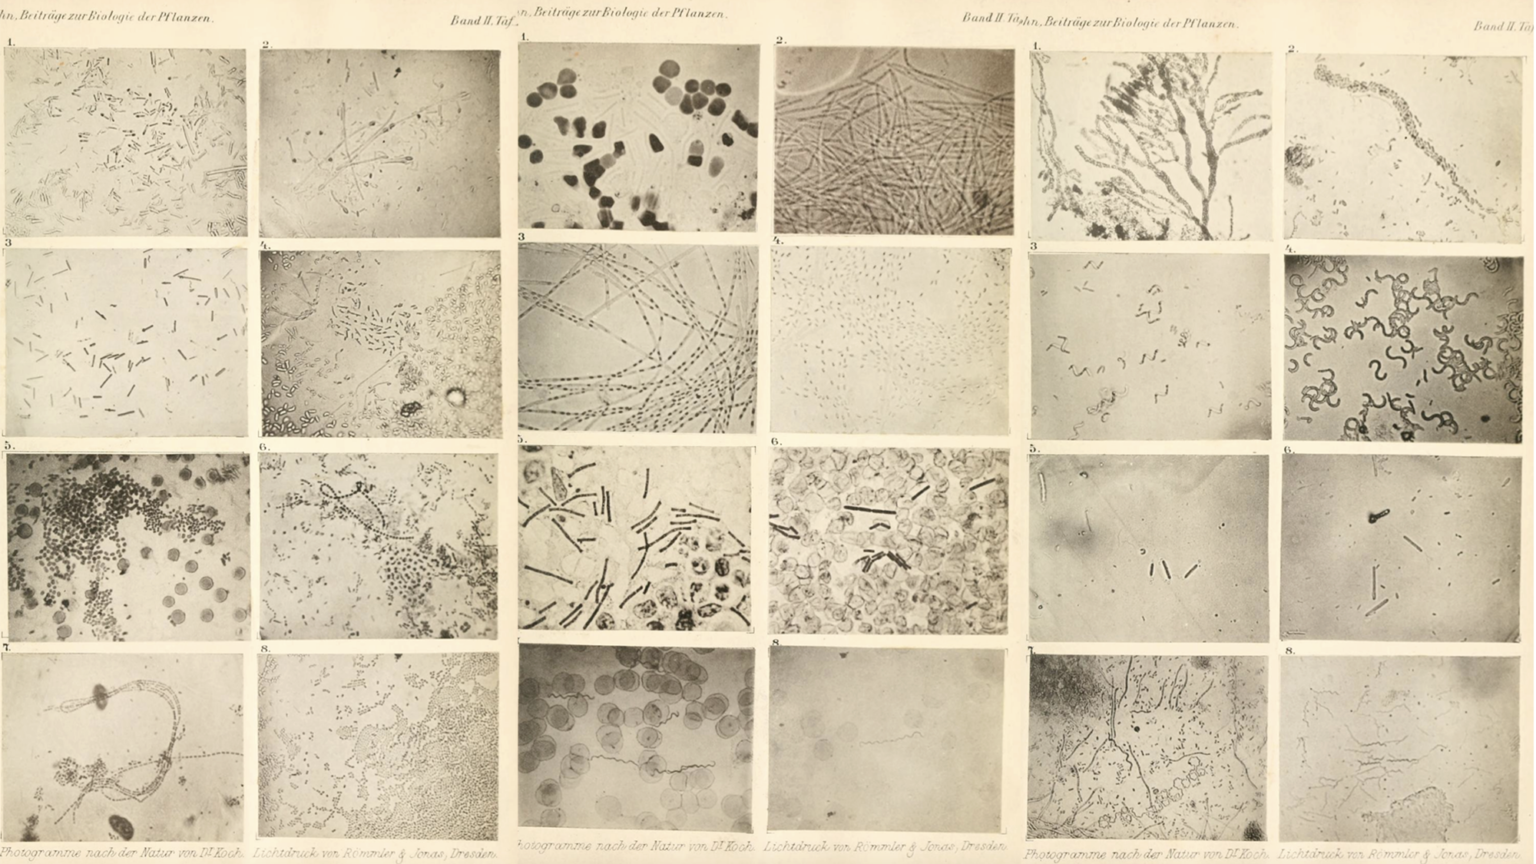 The first published photographs of bacteria.